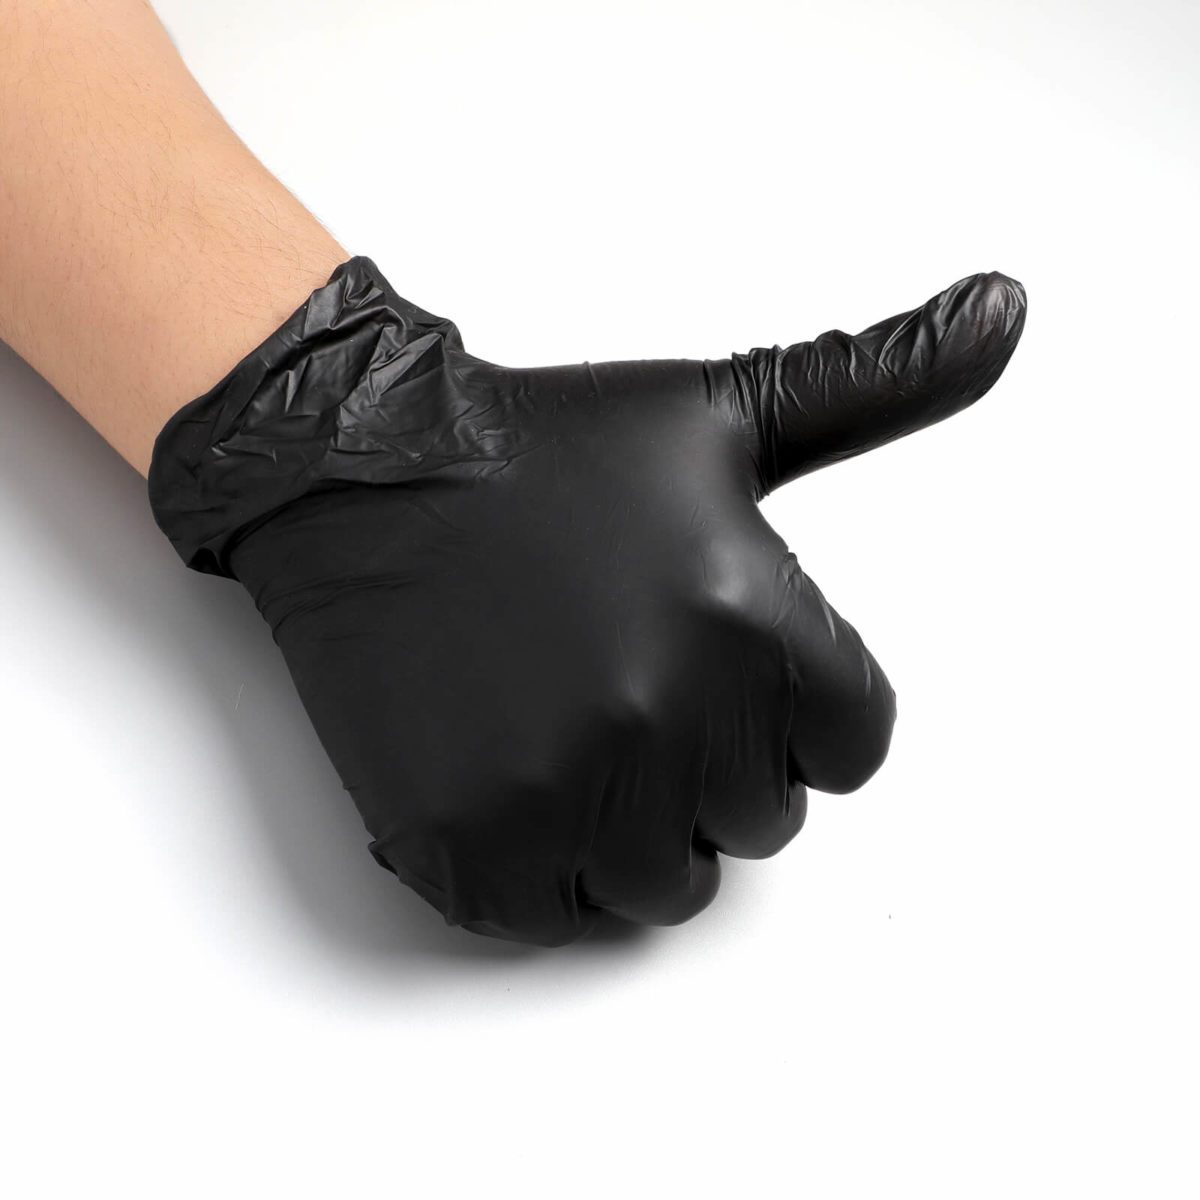 Solong Tattoo Black Disposable Tattoo Latex Gloves Size Large 100 pcs